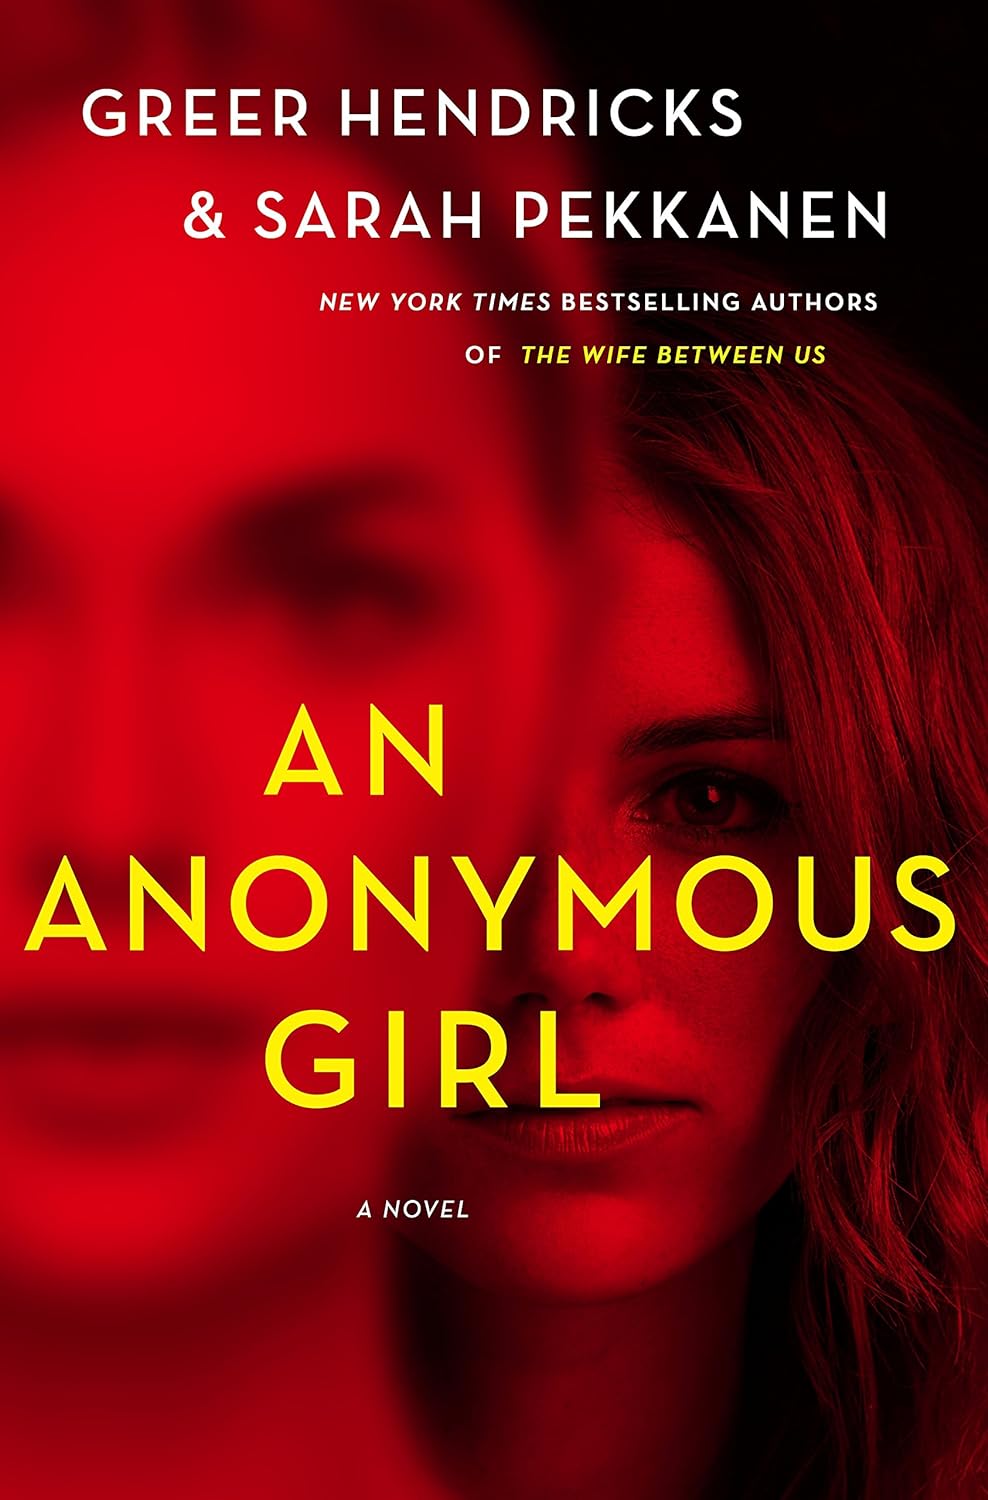 Image for "An Anonymous Girl: A Novel"